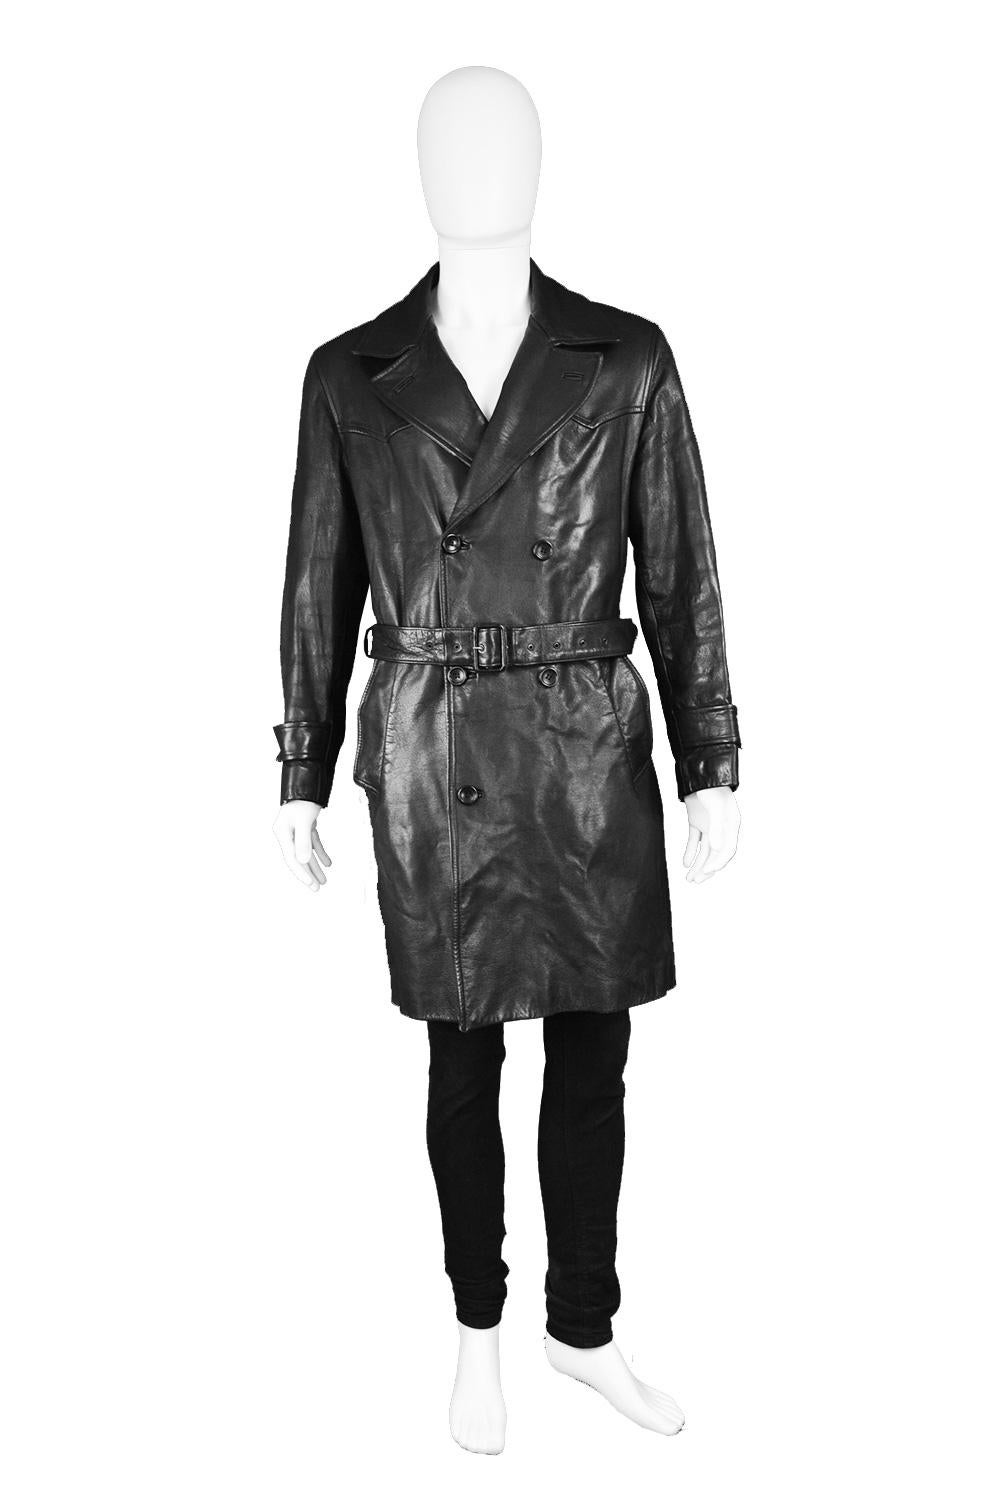 Kenzo Vintage Men's Black Goat Leather Vintage Belted Trenchcoat, 1980s

Size: Marked M but this gives a loose fit and would also suit a Large. Please check measurements. 
Chest - 46” / 117cm (allow a few inches room for movement and clothes